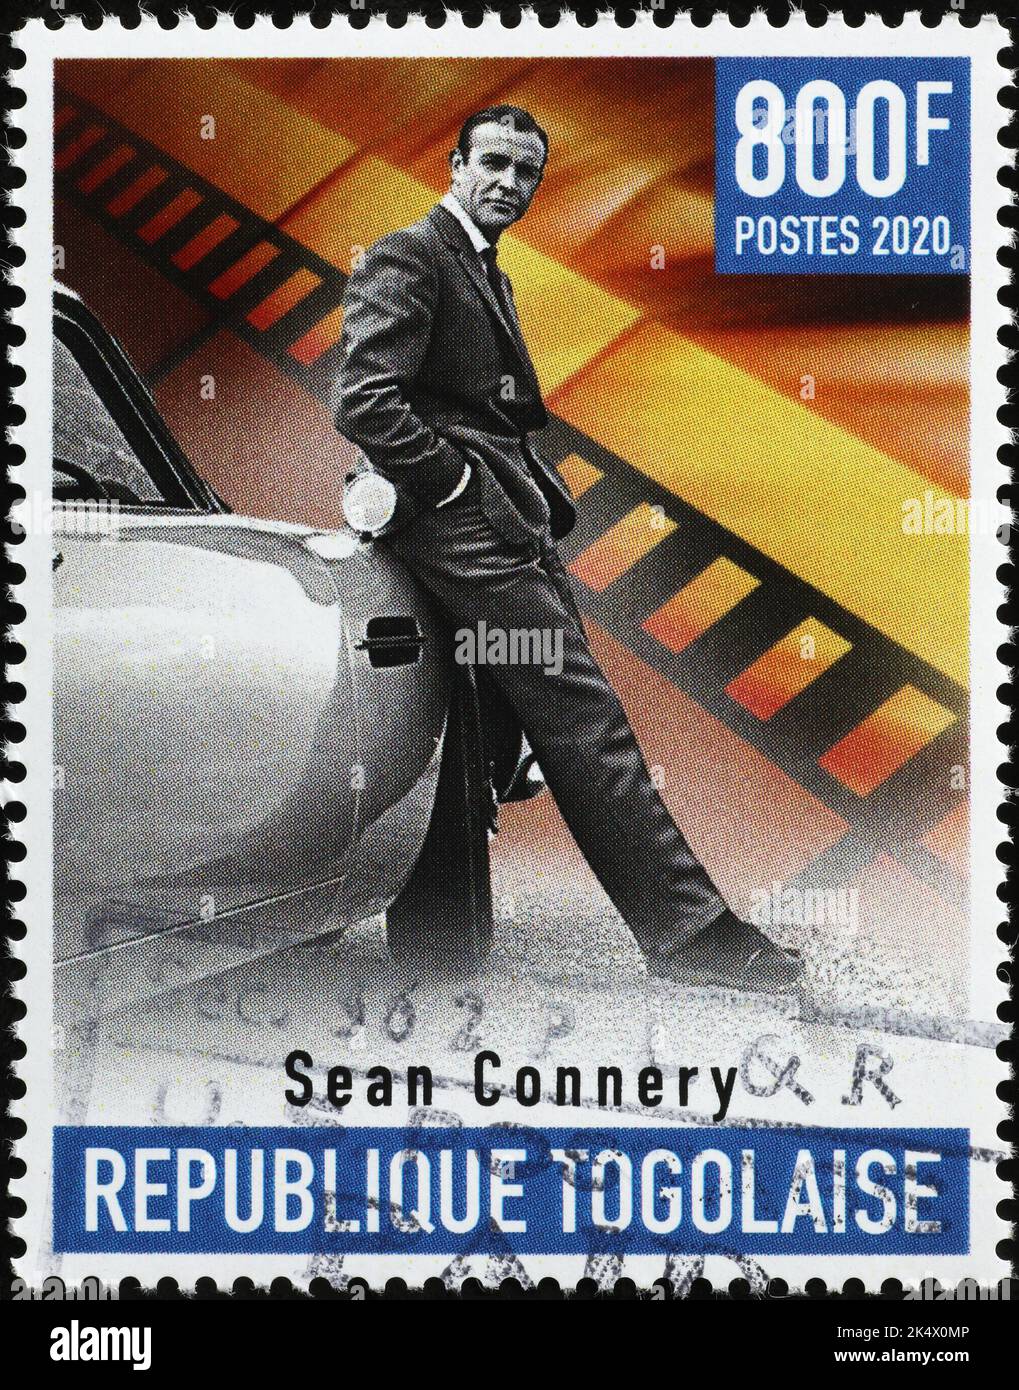 Sean Connery as James Bond 007 on african stamp Stock Photo